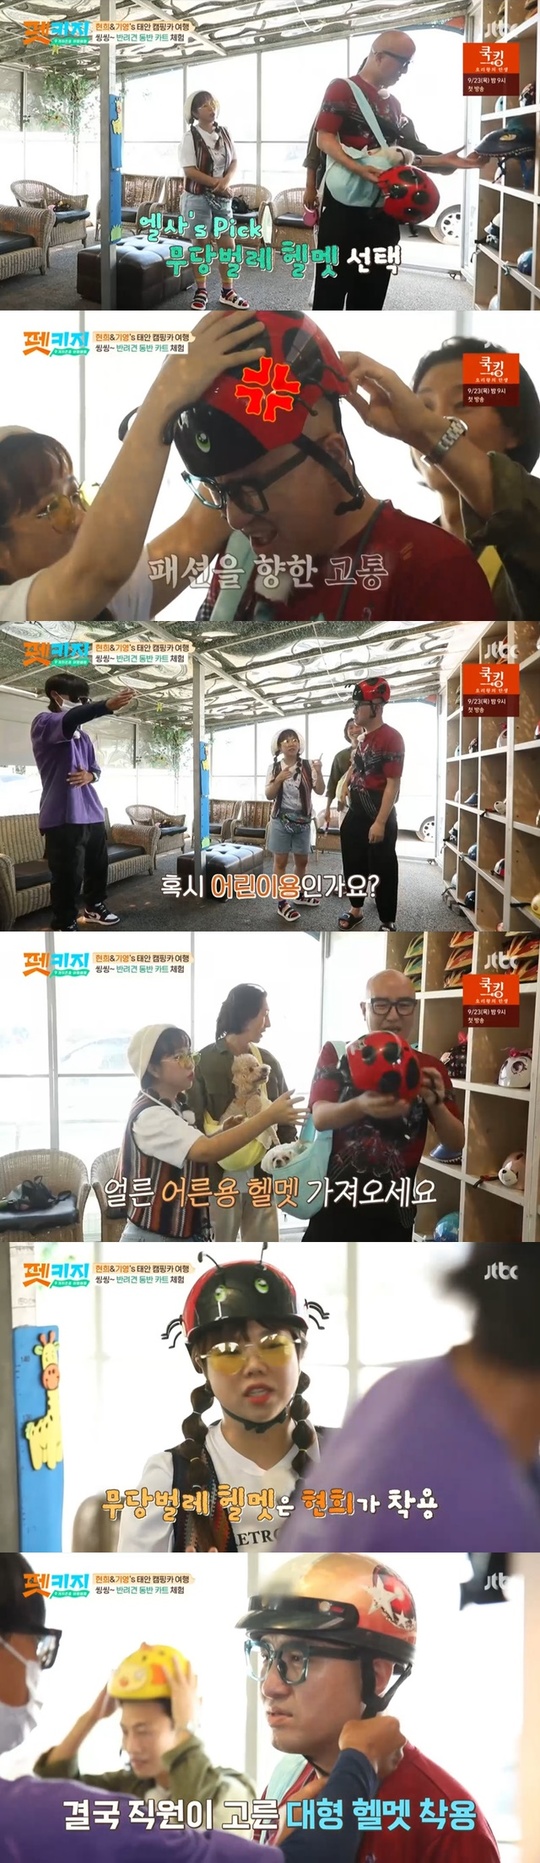 Hong Hyon-hee certified the cowpox in a childrens helmet.On September 16, JTBC Travel Battle - Pet key, Hong Hyon-hee and Kang Ki-young went to Cart during camping trip with The Client Hong Seok-cheon.On this day, Hong Hyon-hee and Kang Ki-young planned a personal trip with The Client Hong Seok-cheon and a companion dog Elsa, and had time to ride Cart with a companion dog on one of them.Time to pick out a helmet before riding Cart, Hong Seok-cheon picked out a ladybug-shaped cute helmet but had to take it off because it did not fit.The ladybug helmet turns out to be for children.Hong Seok-cheon was humiliated by wearing a larger bear-shaped helmet that was a little bigger and was not even right.